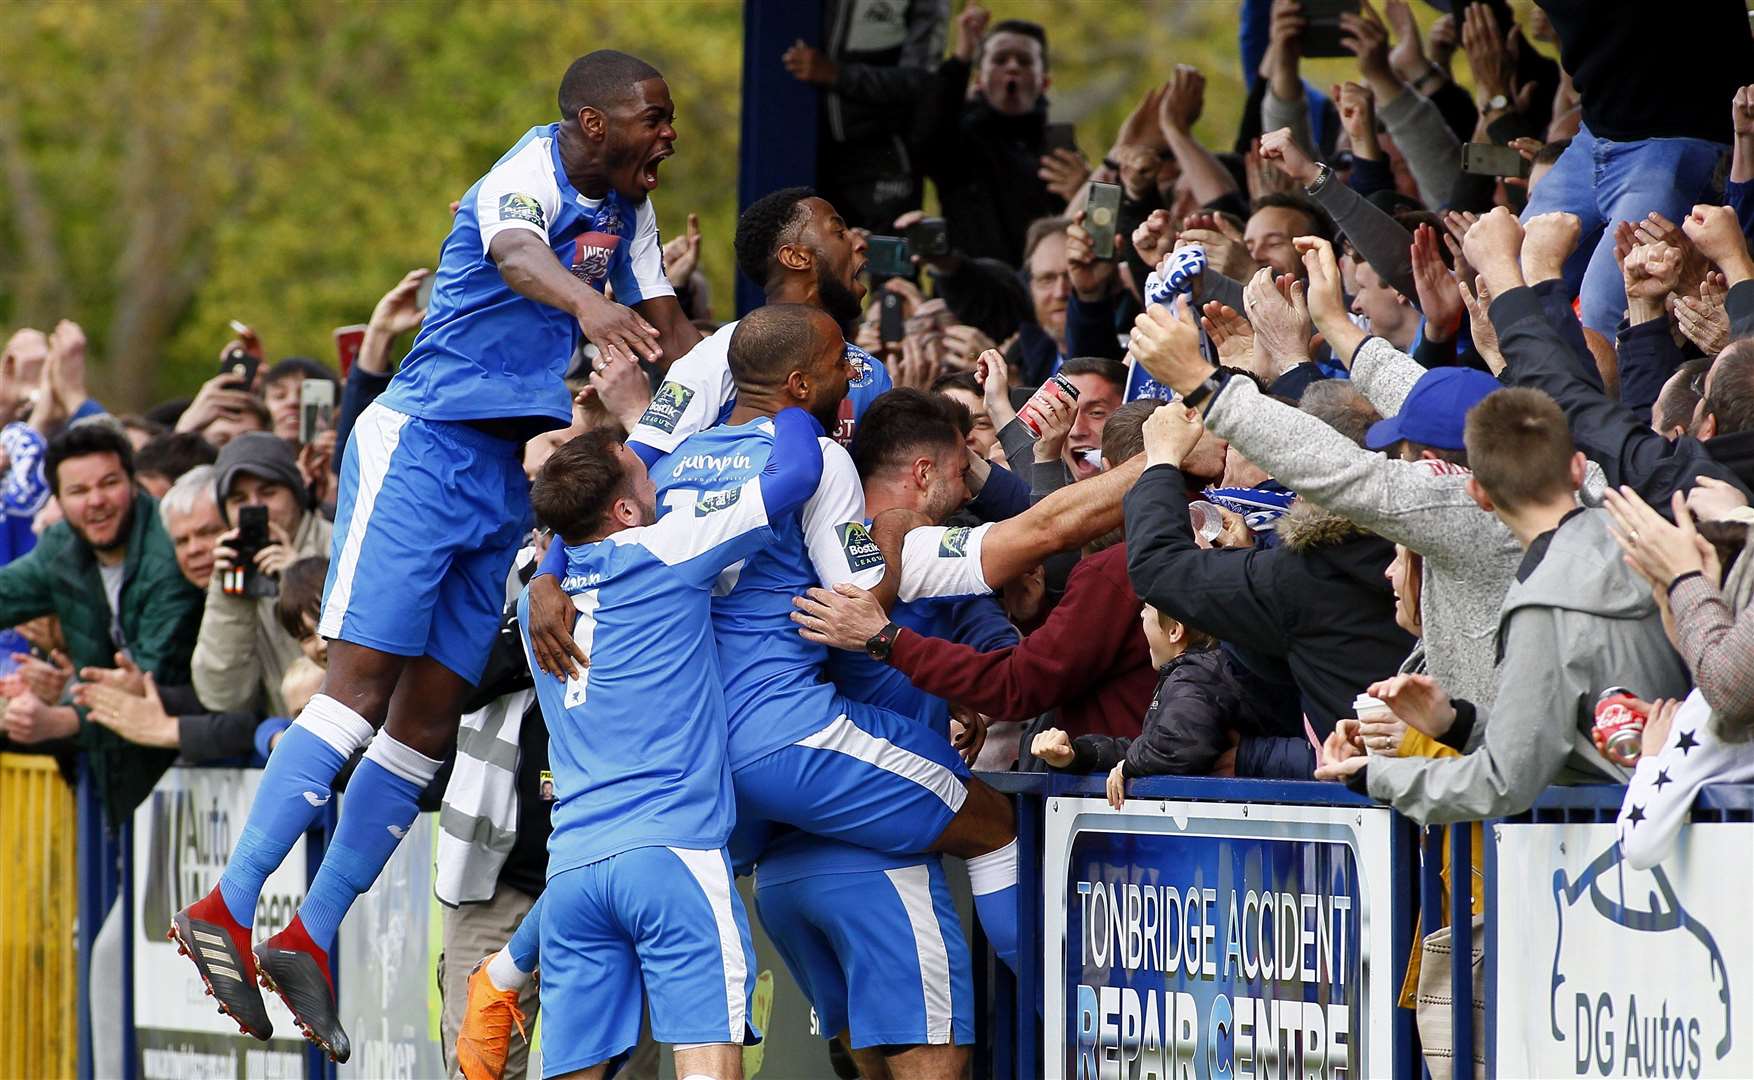 Tonbridge Angels players and fans celebrate successful times at Longmead Stadium. Picture: Sean Aidan